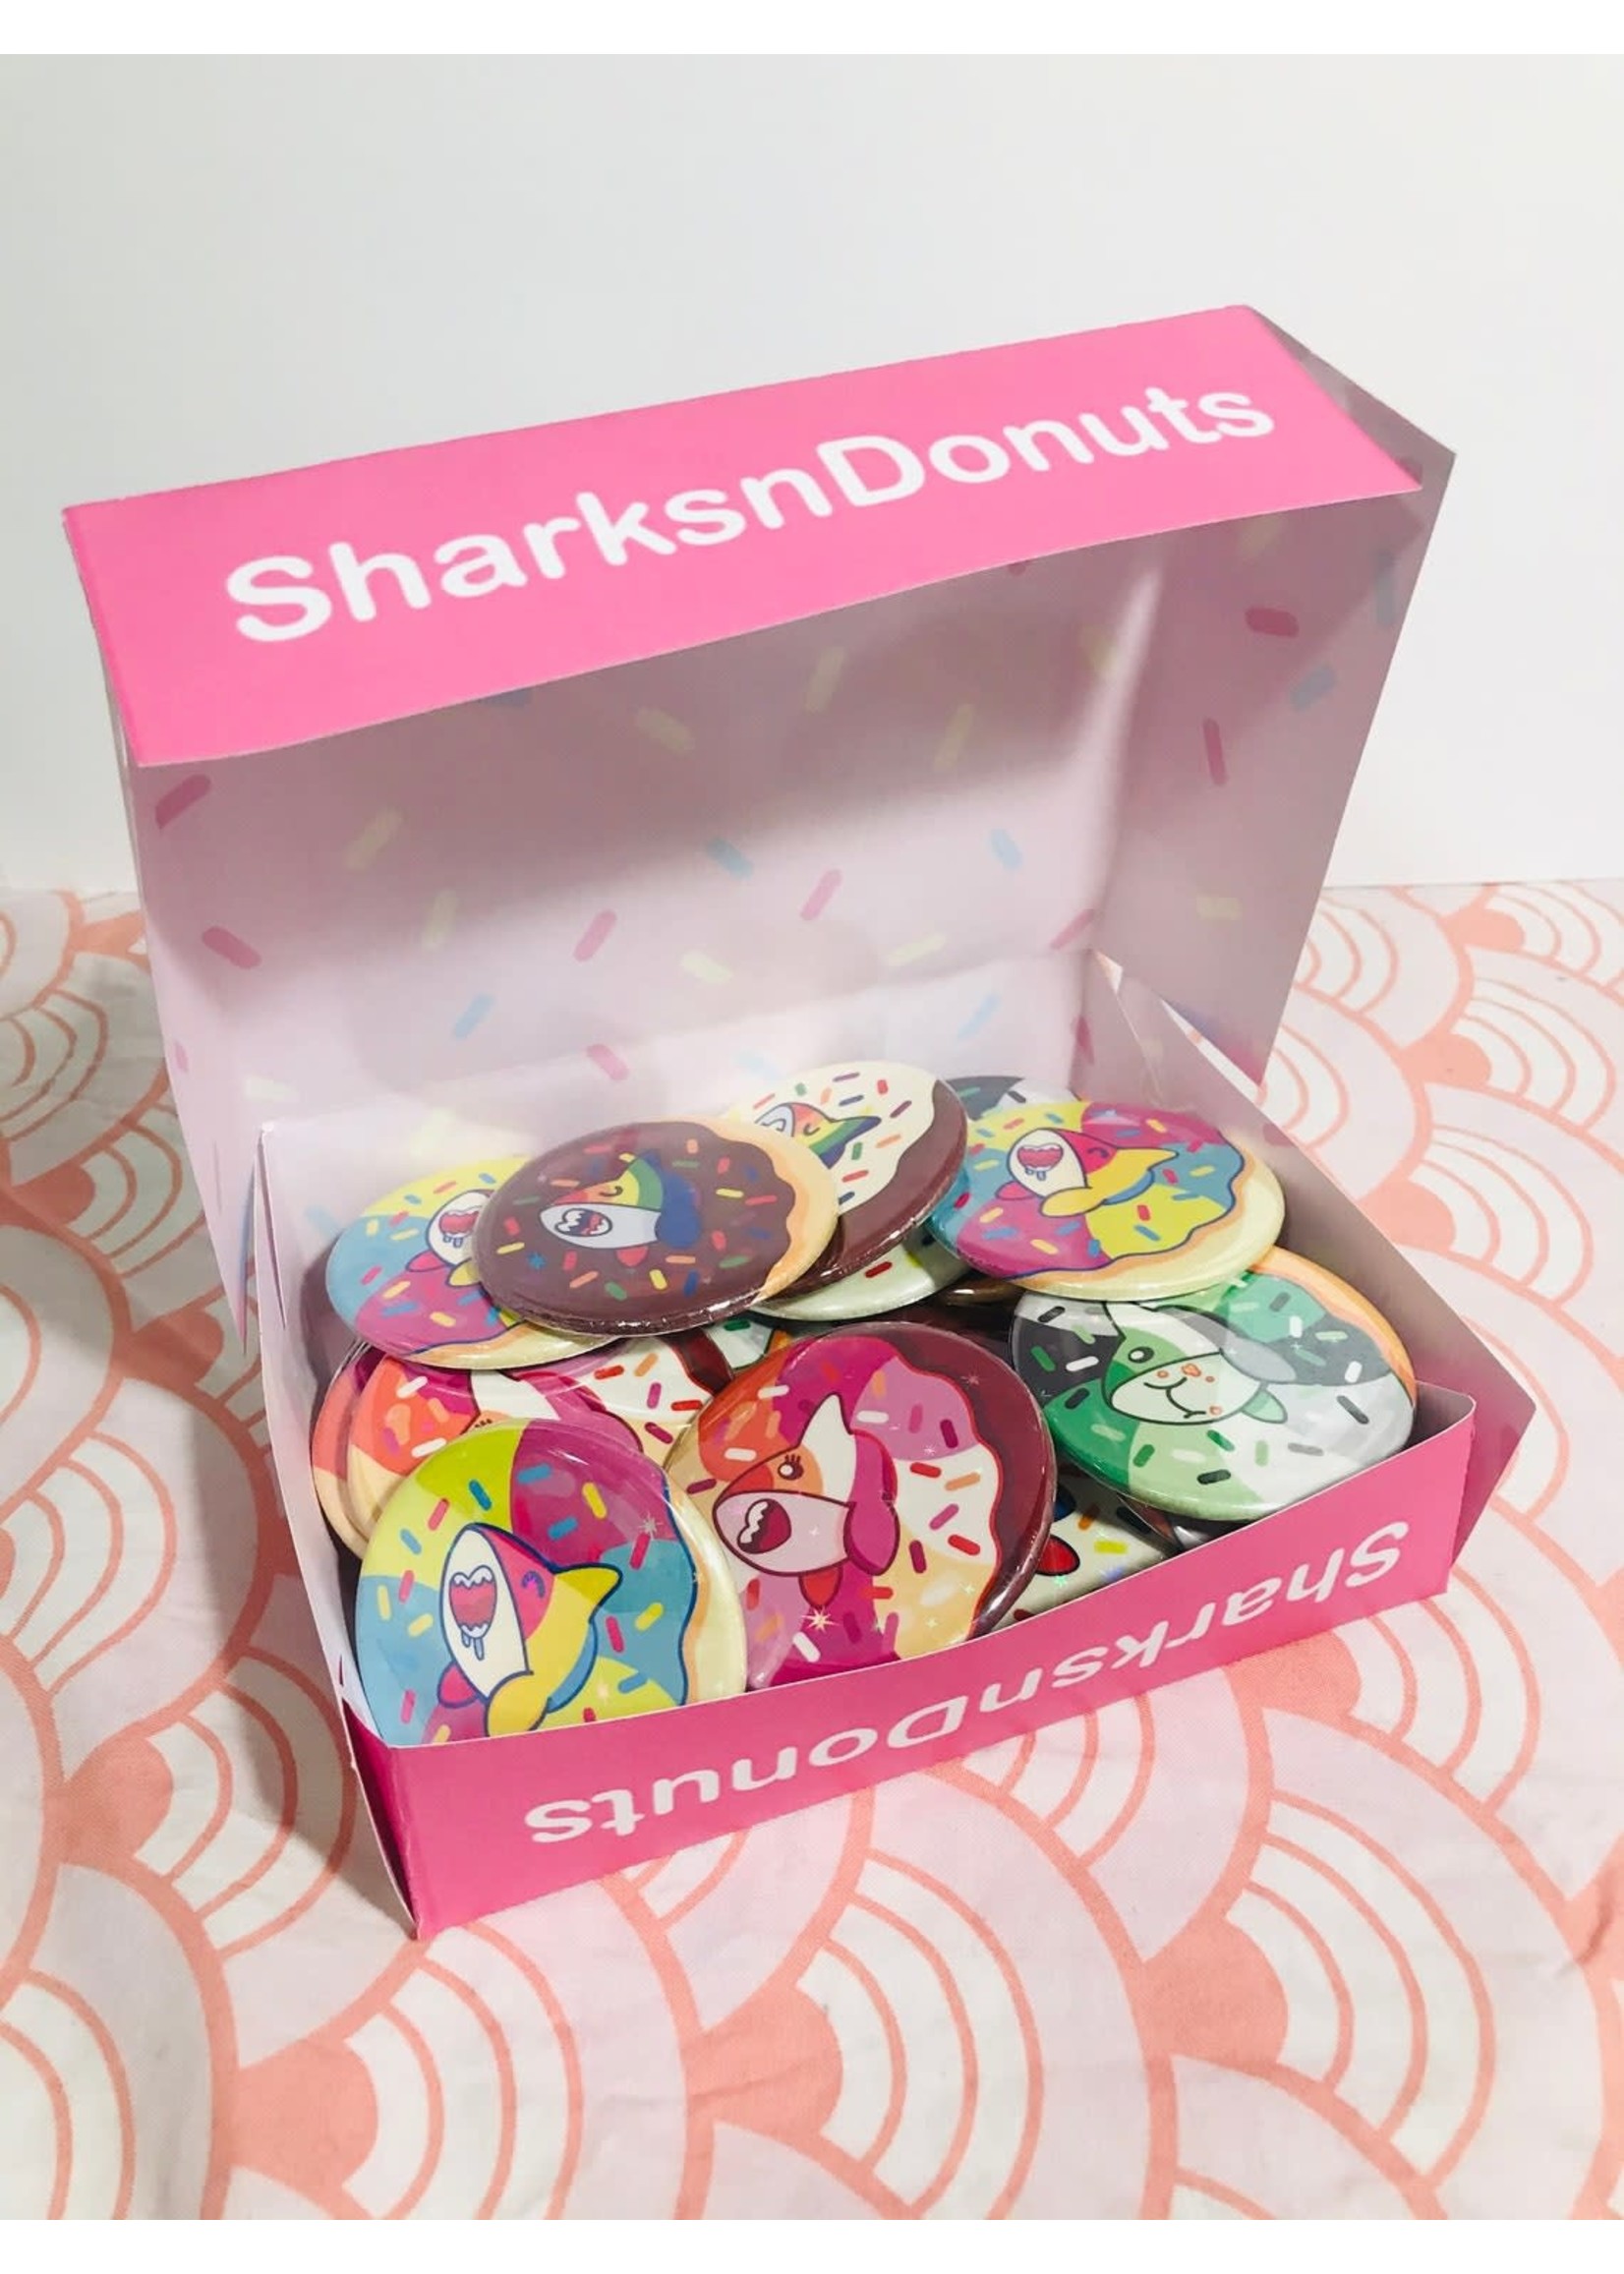 SHARKNDONUTS Pride Sharks and Donut Buttons Pride Chocolate